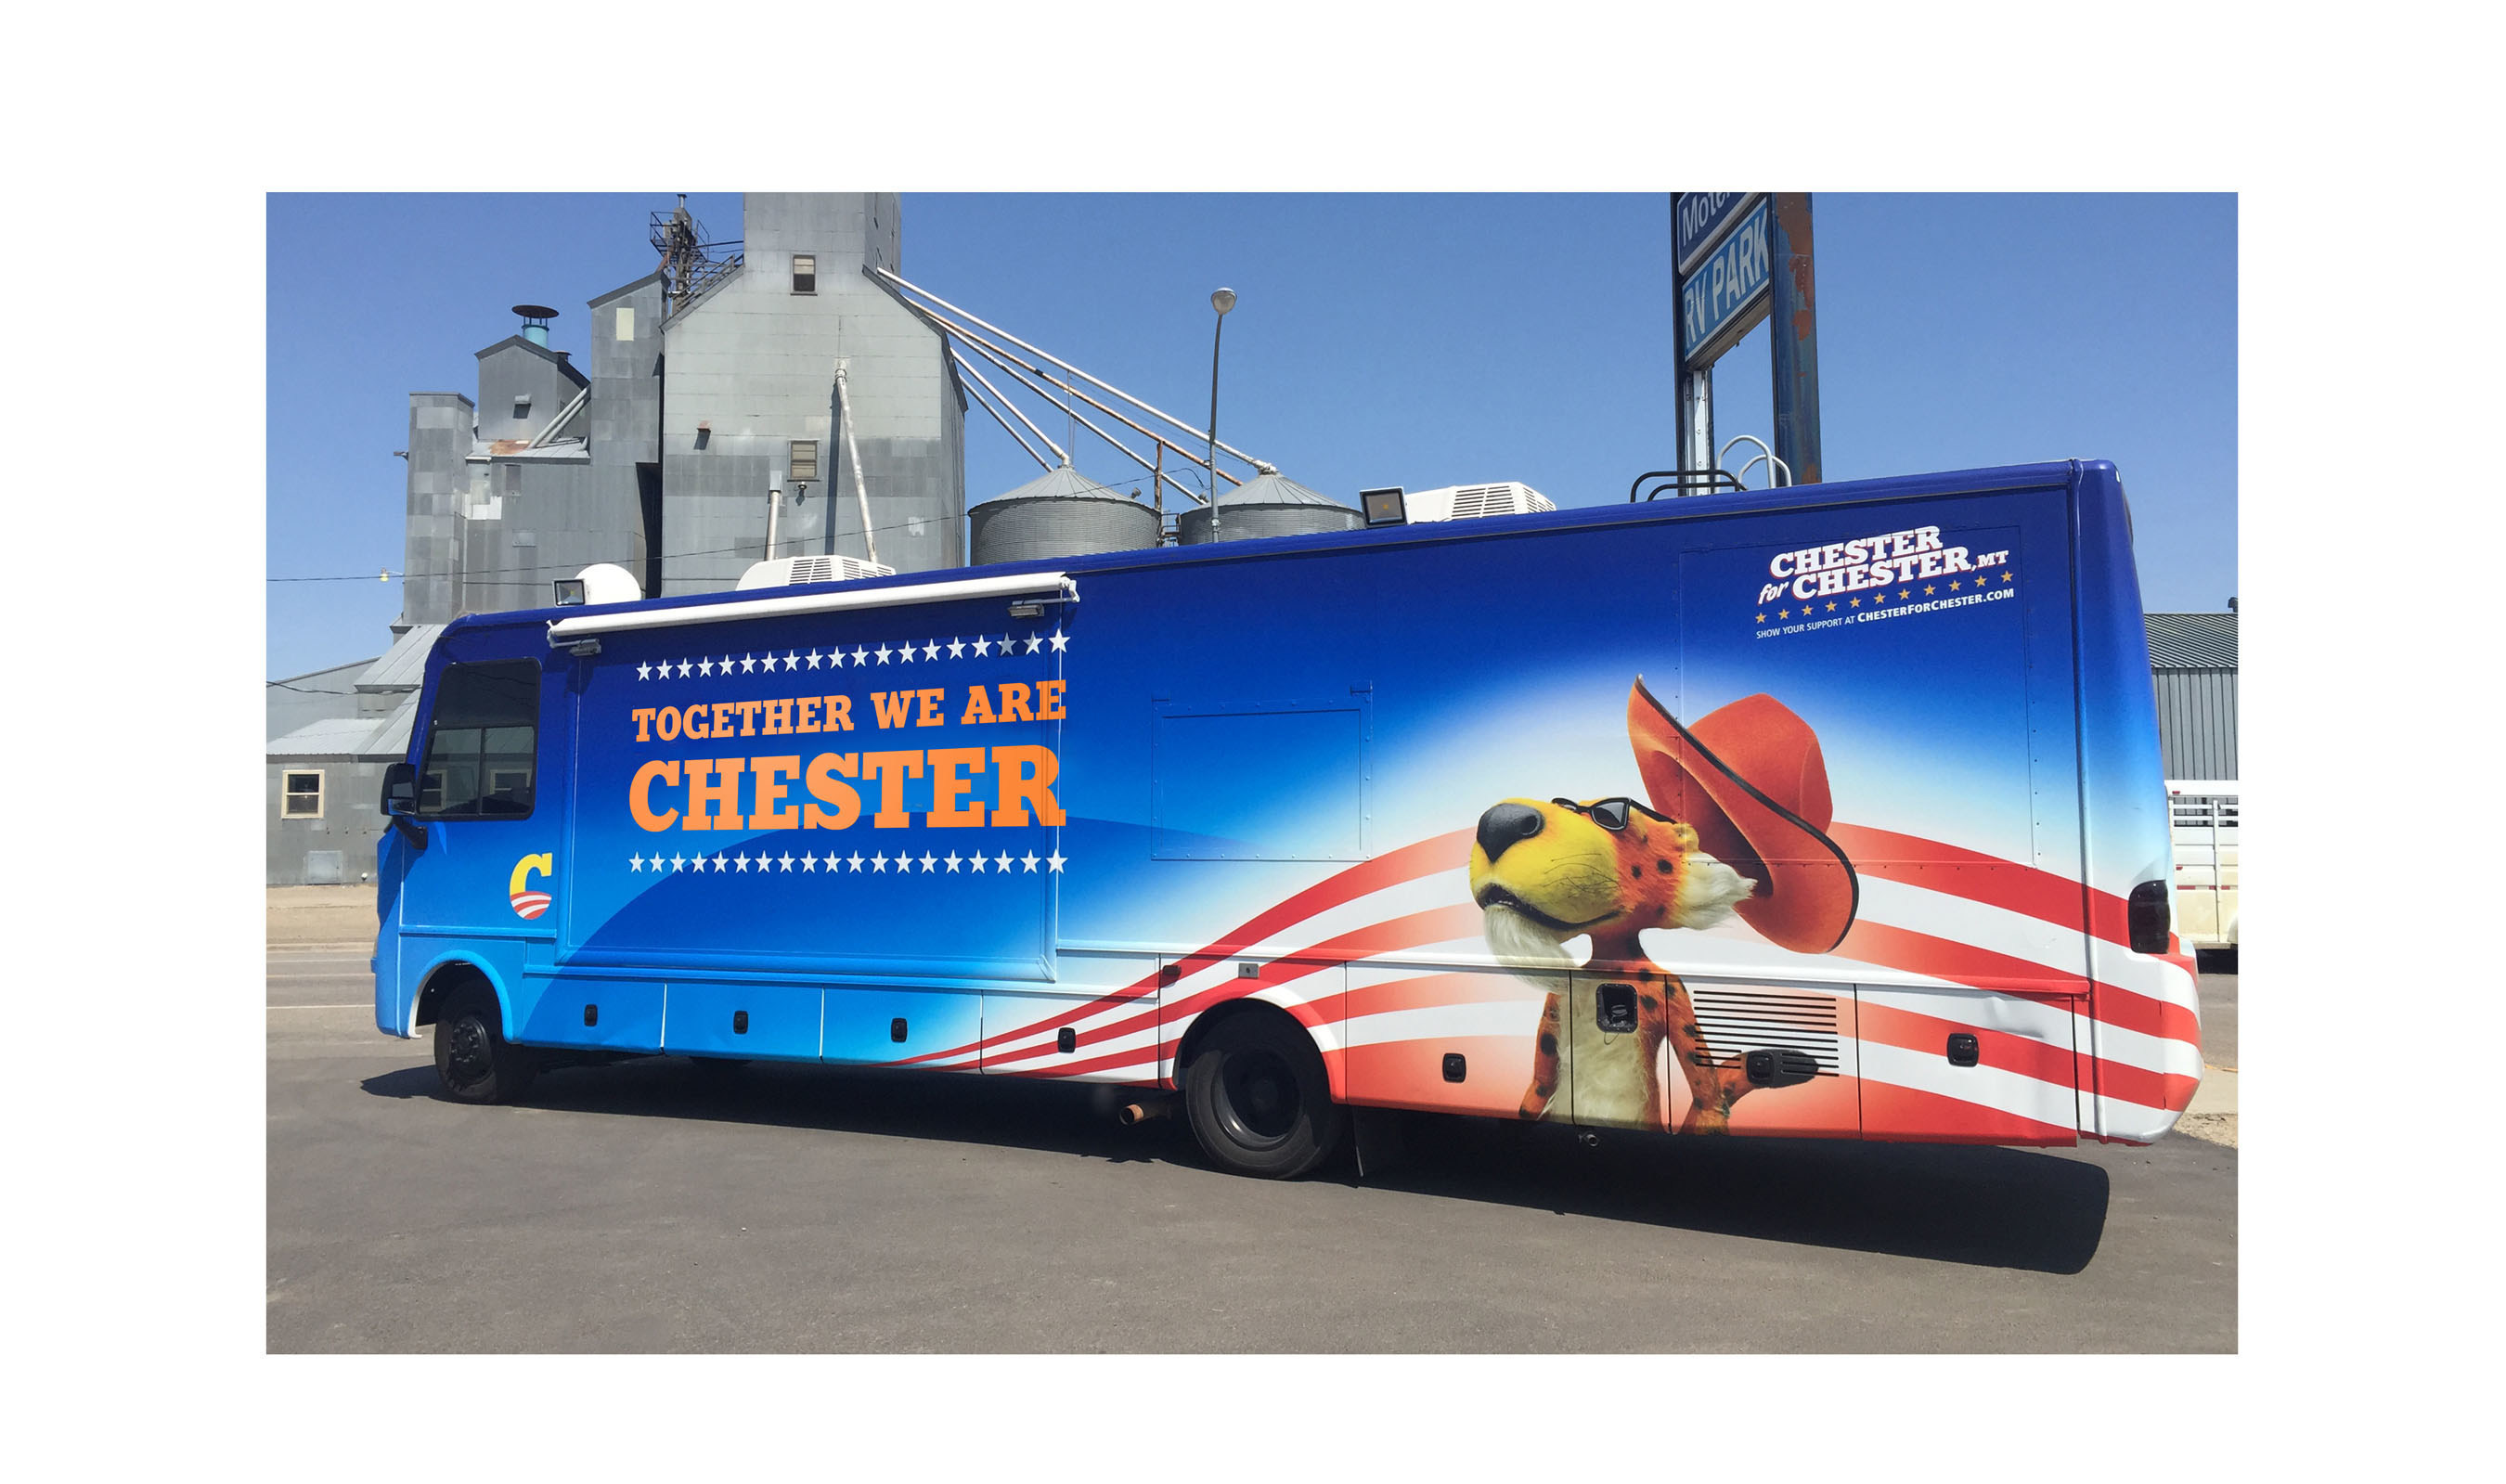 Chester Cheetah is working to bring a cheesier tomorrow, bringing more pranks (and fun) to politics with his campaign in Chester, Mont.